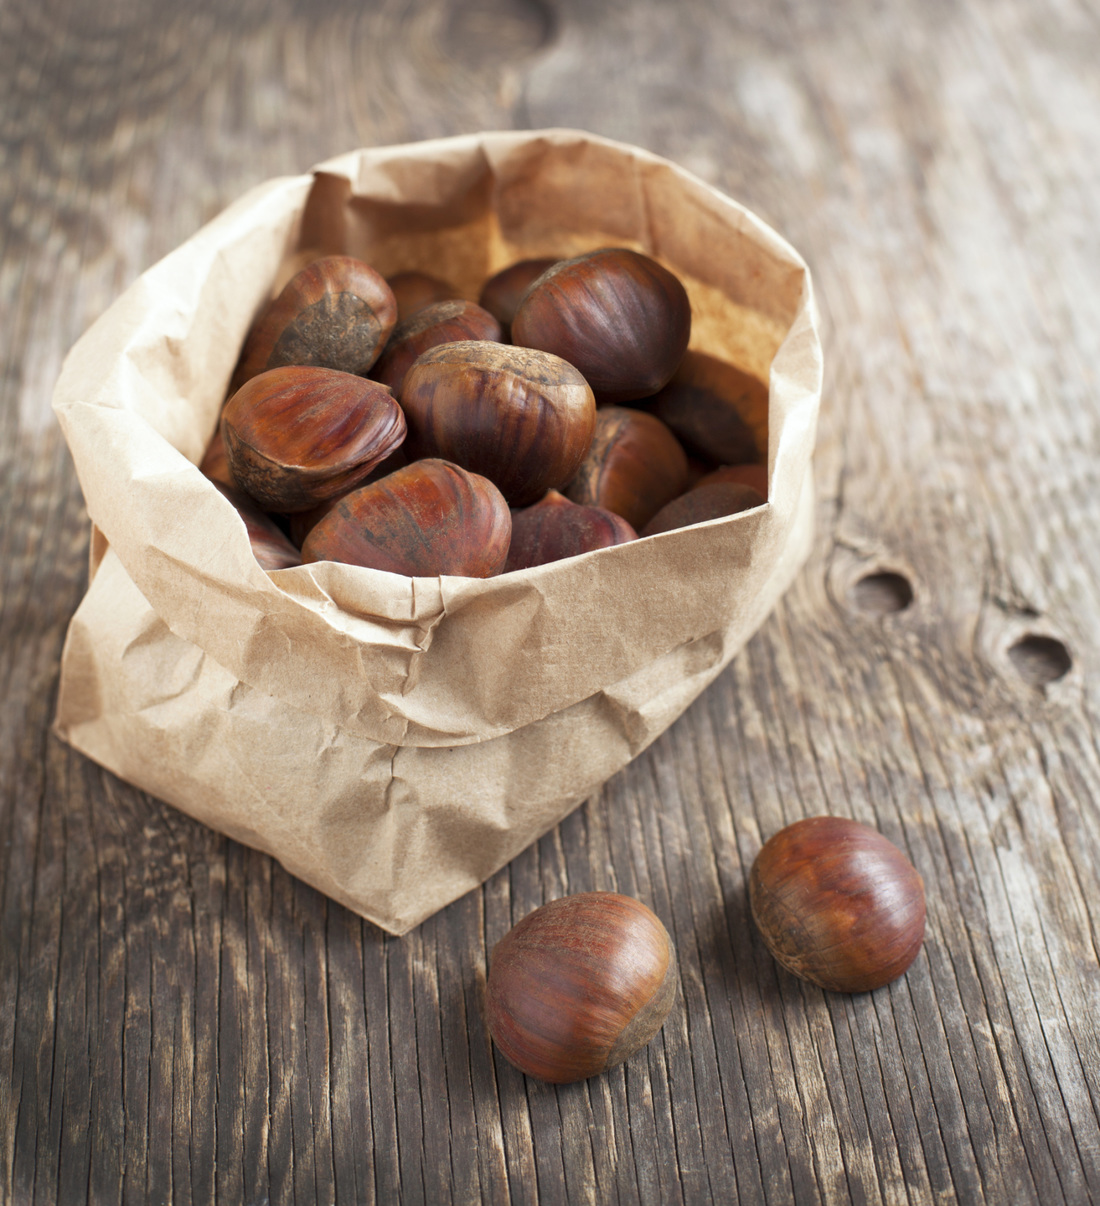 Chestnuts in a brown paper bag